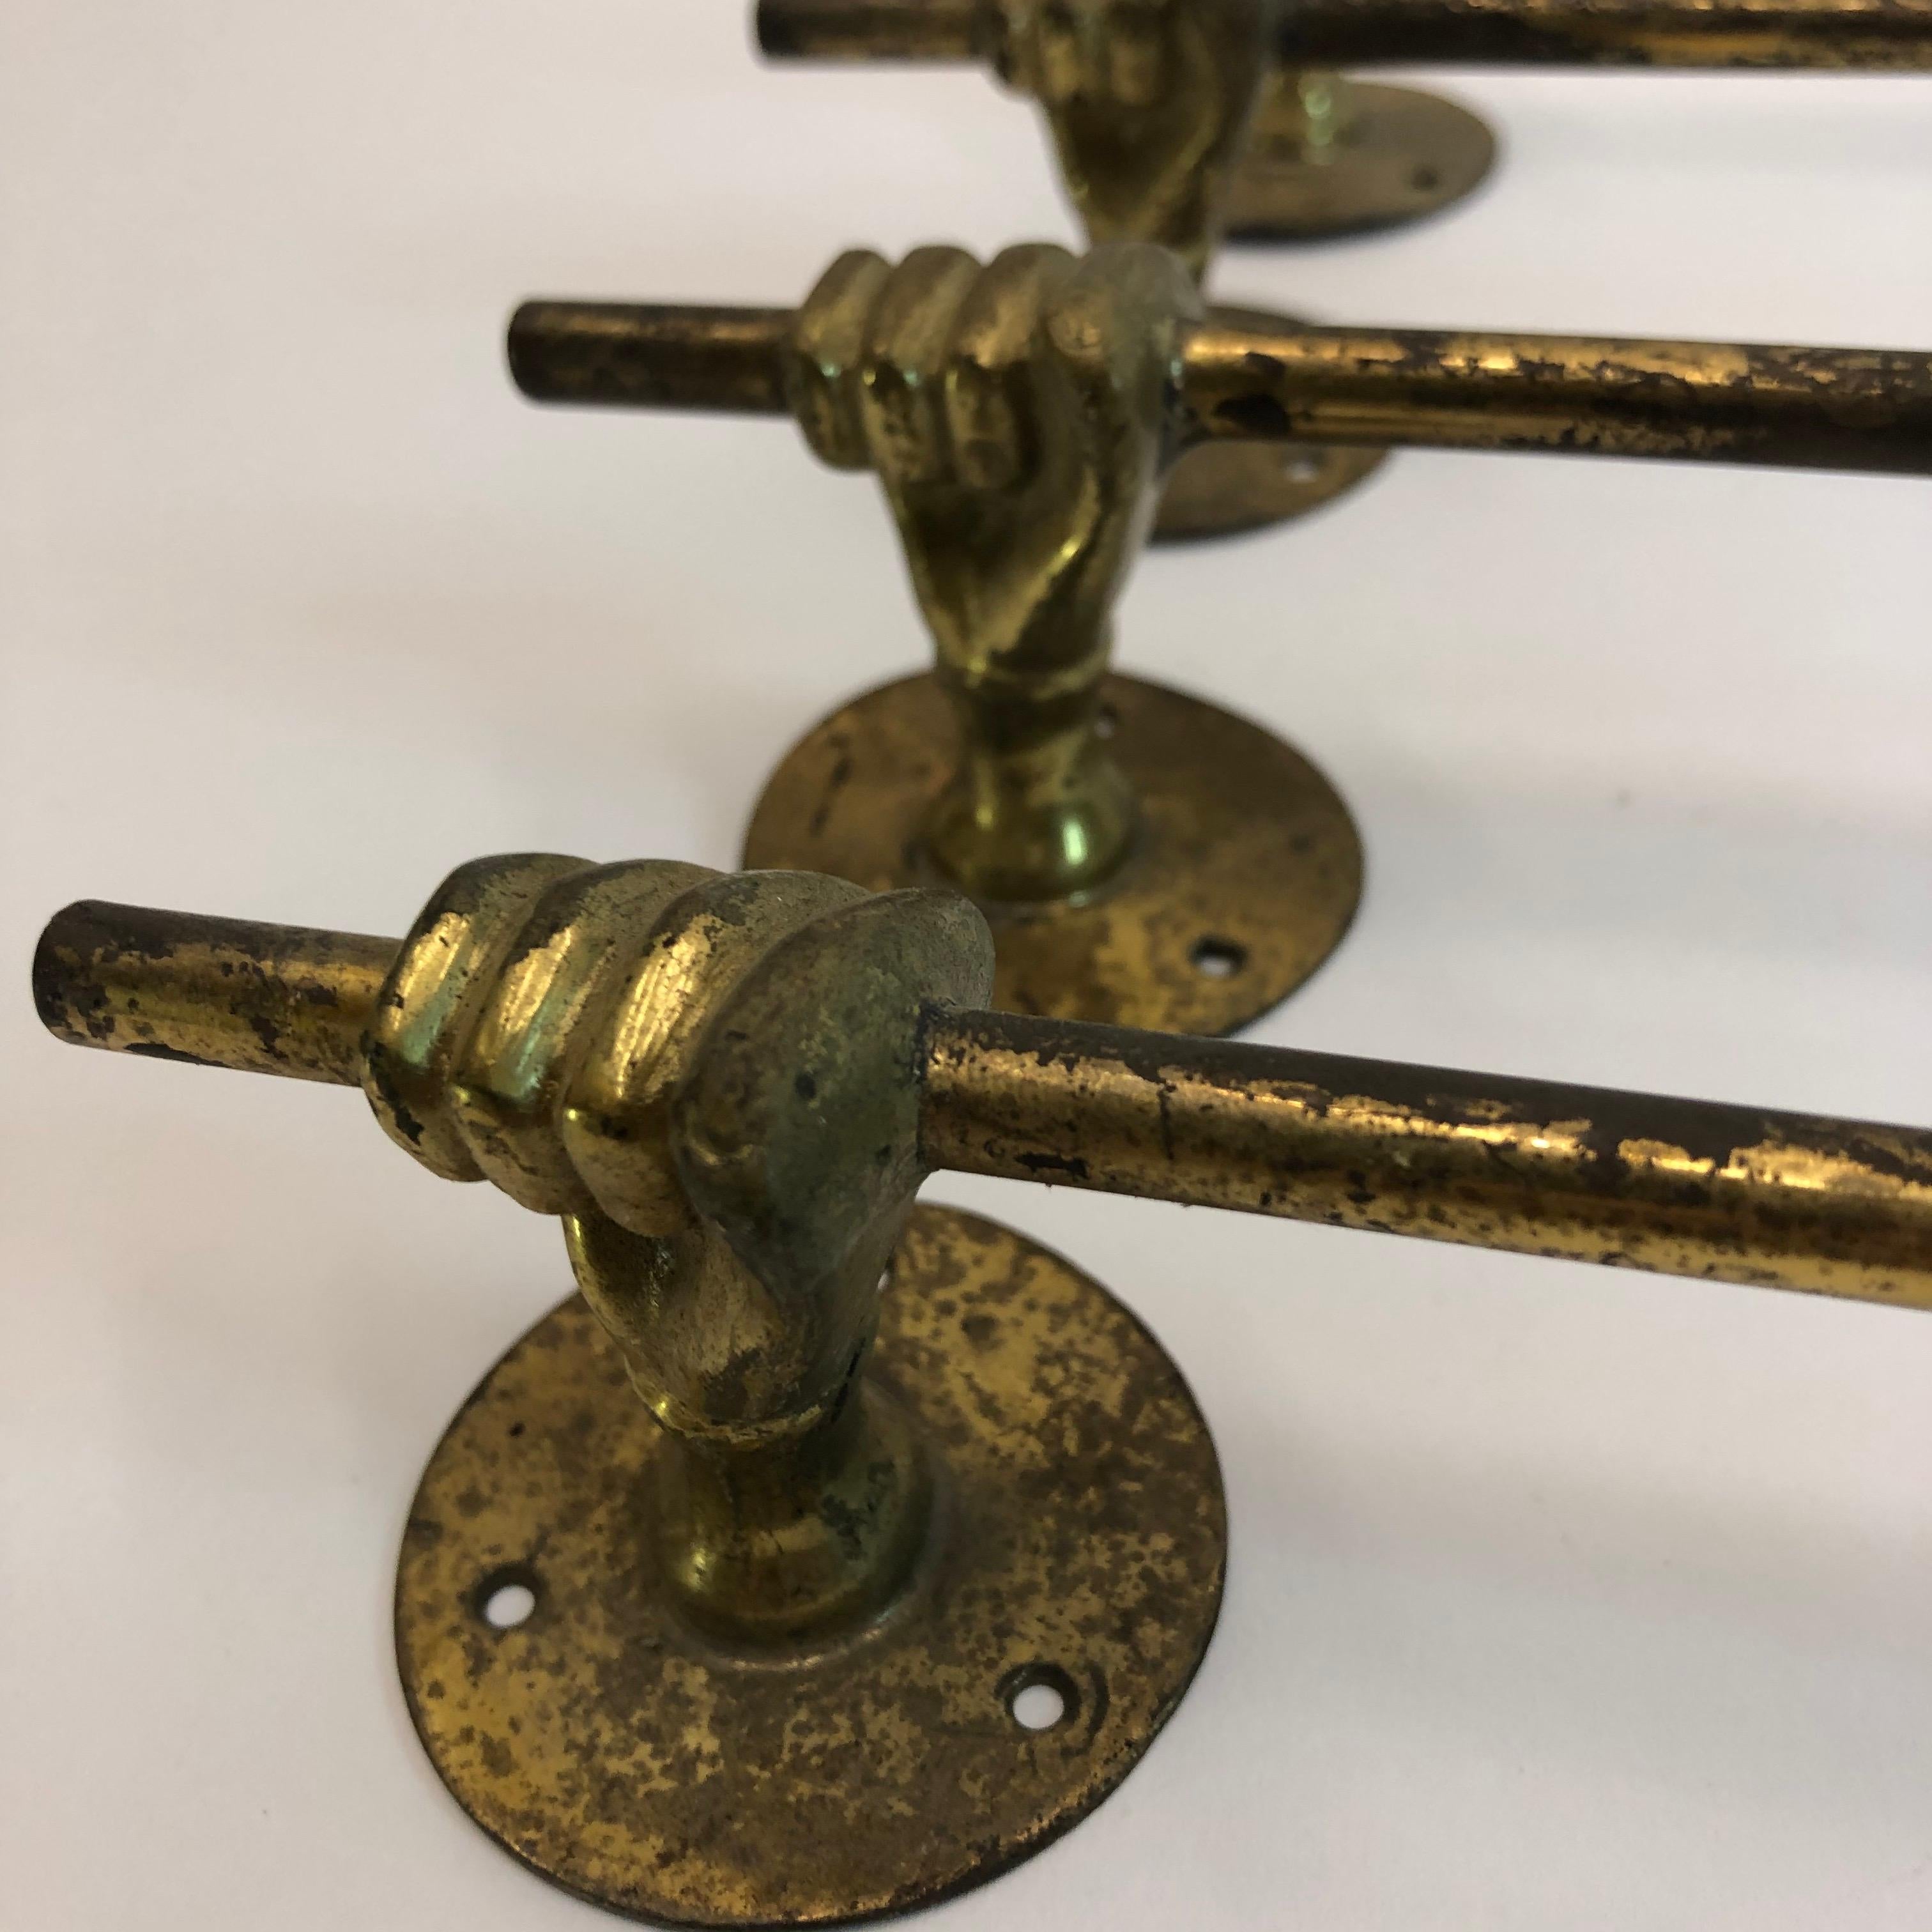 Mid-20th Century Vintage Metal/Brass Hands/Fists Holding a Towel Rail